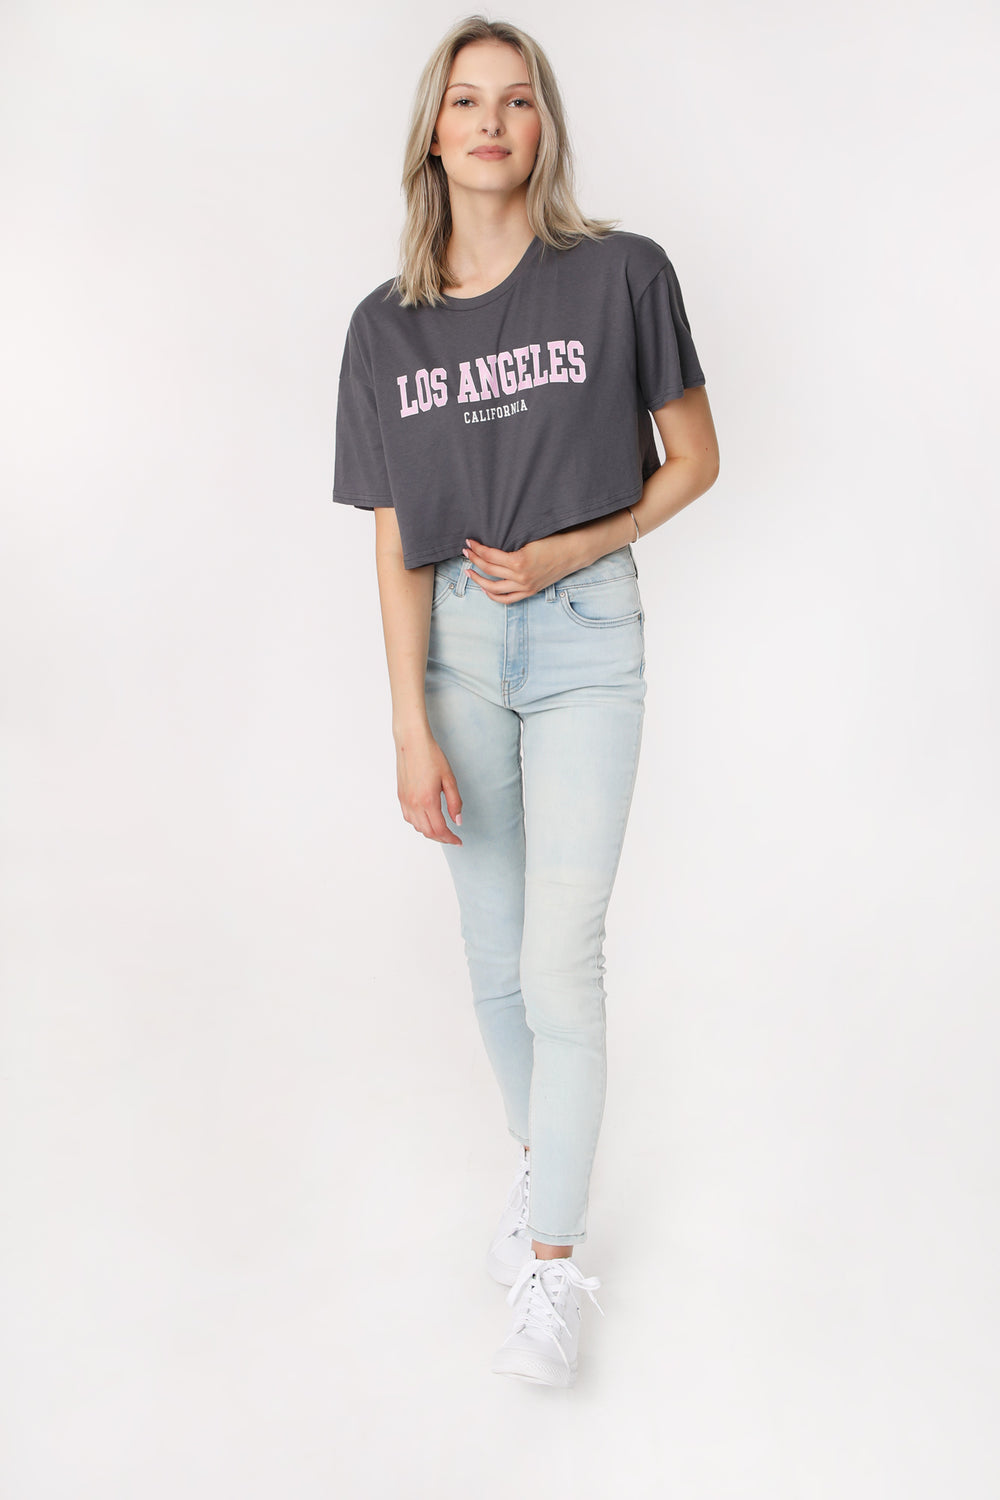 Womens Los Angeles Cropped Tee Womens Los Angeles Cropped Tee